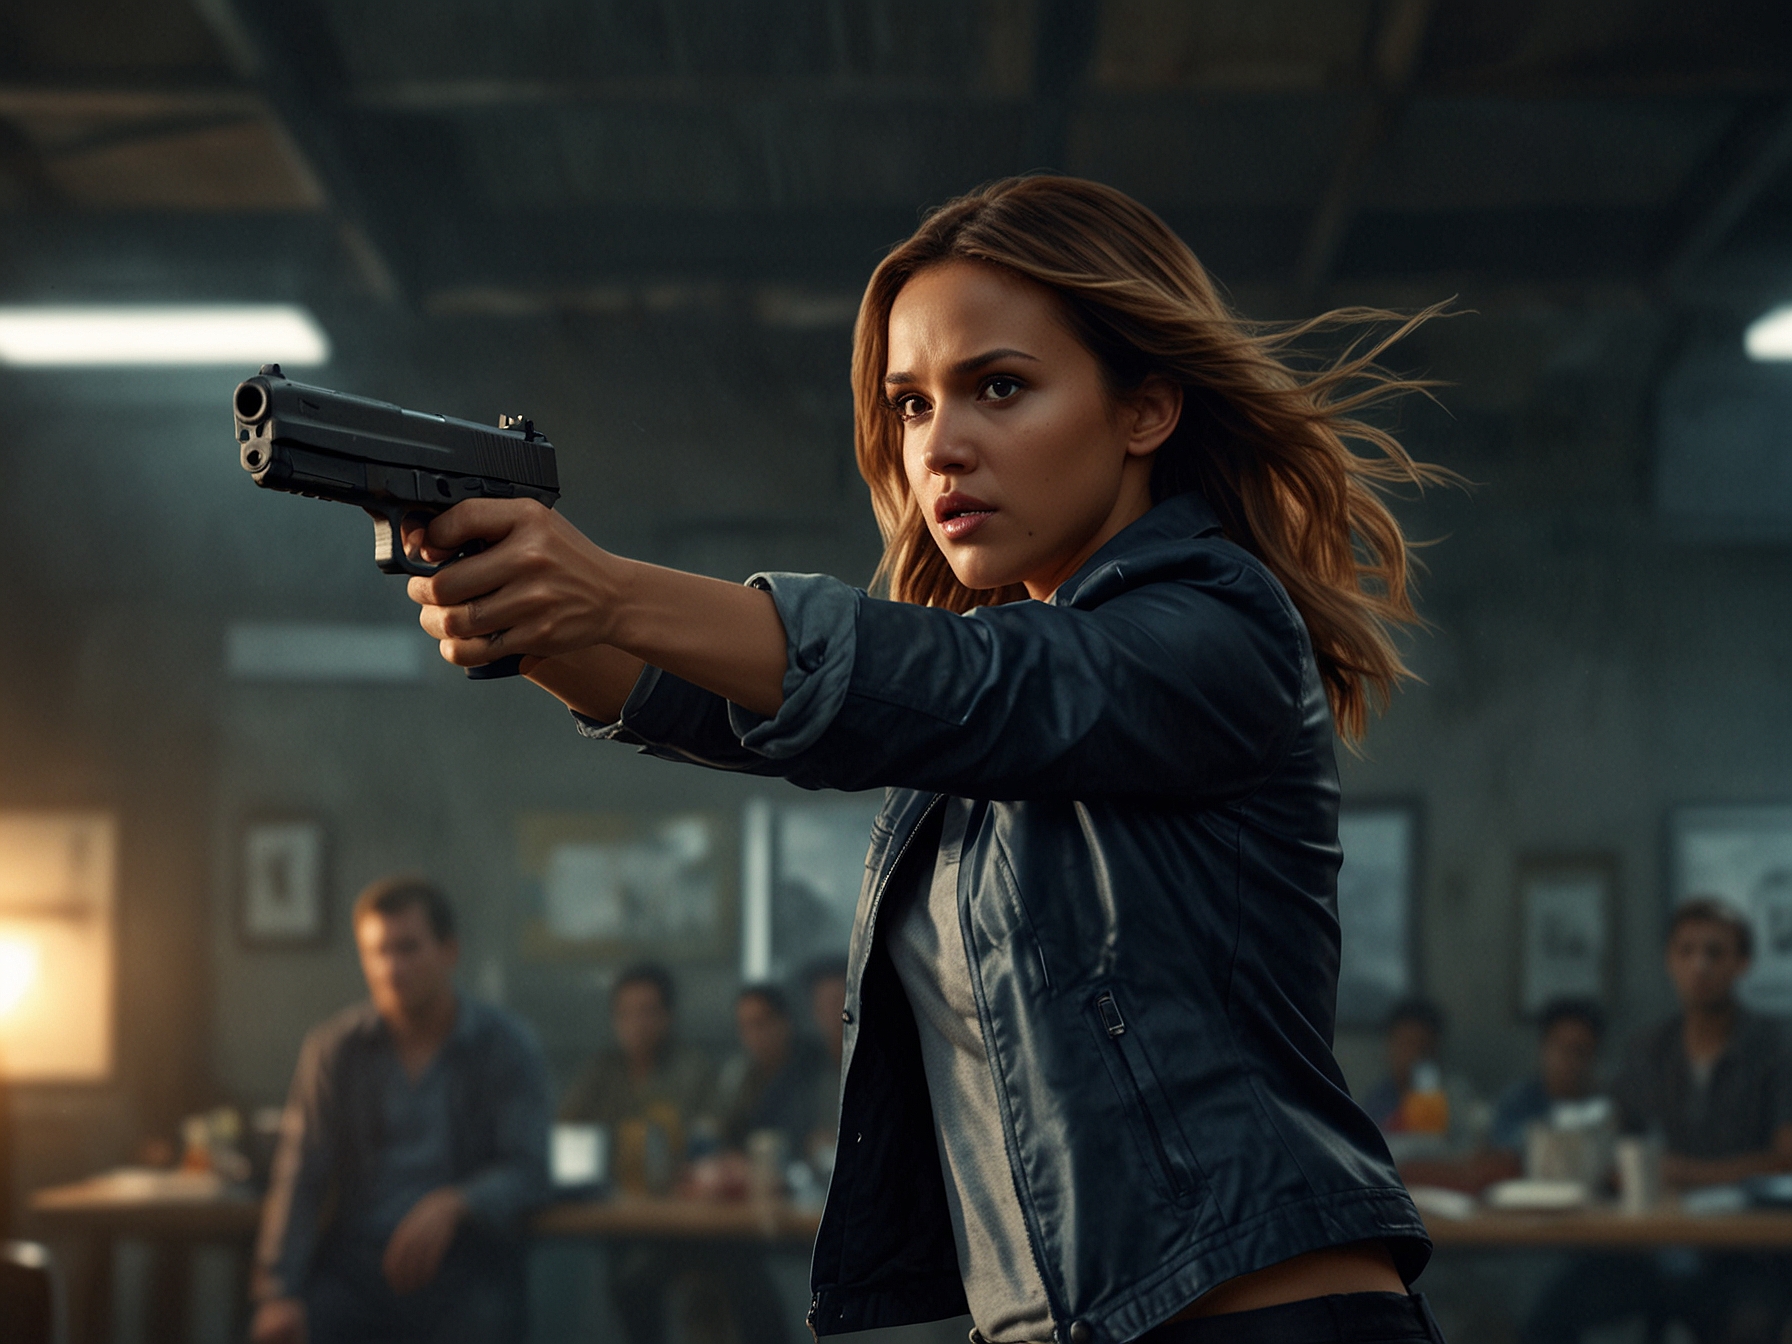 A sneak peek of 'Trigger Warning' featuring action-packed scenes with Jessica Alba in character. The image highlights her return to the action genre, creating anticipation for the Netflix release.